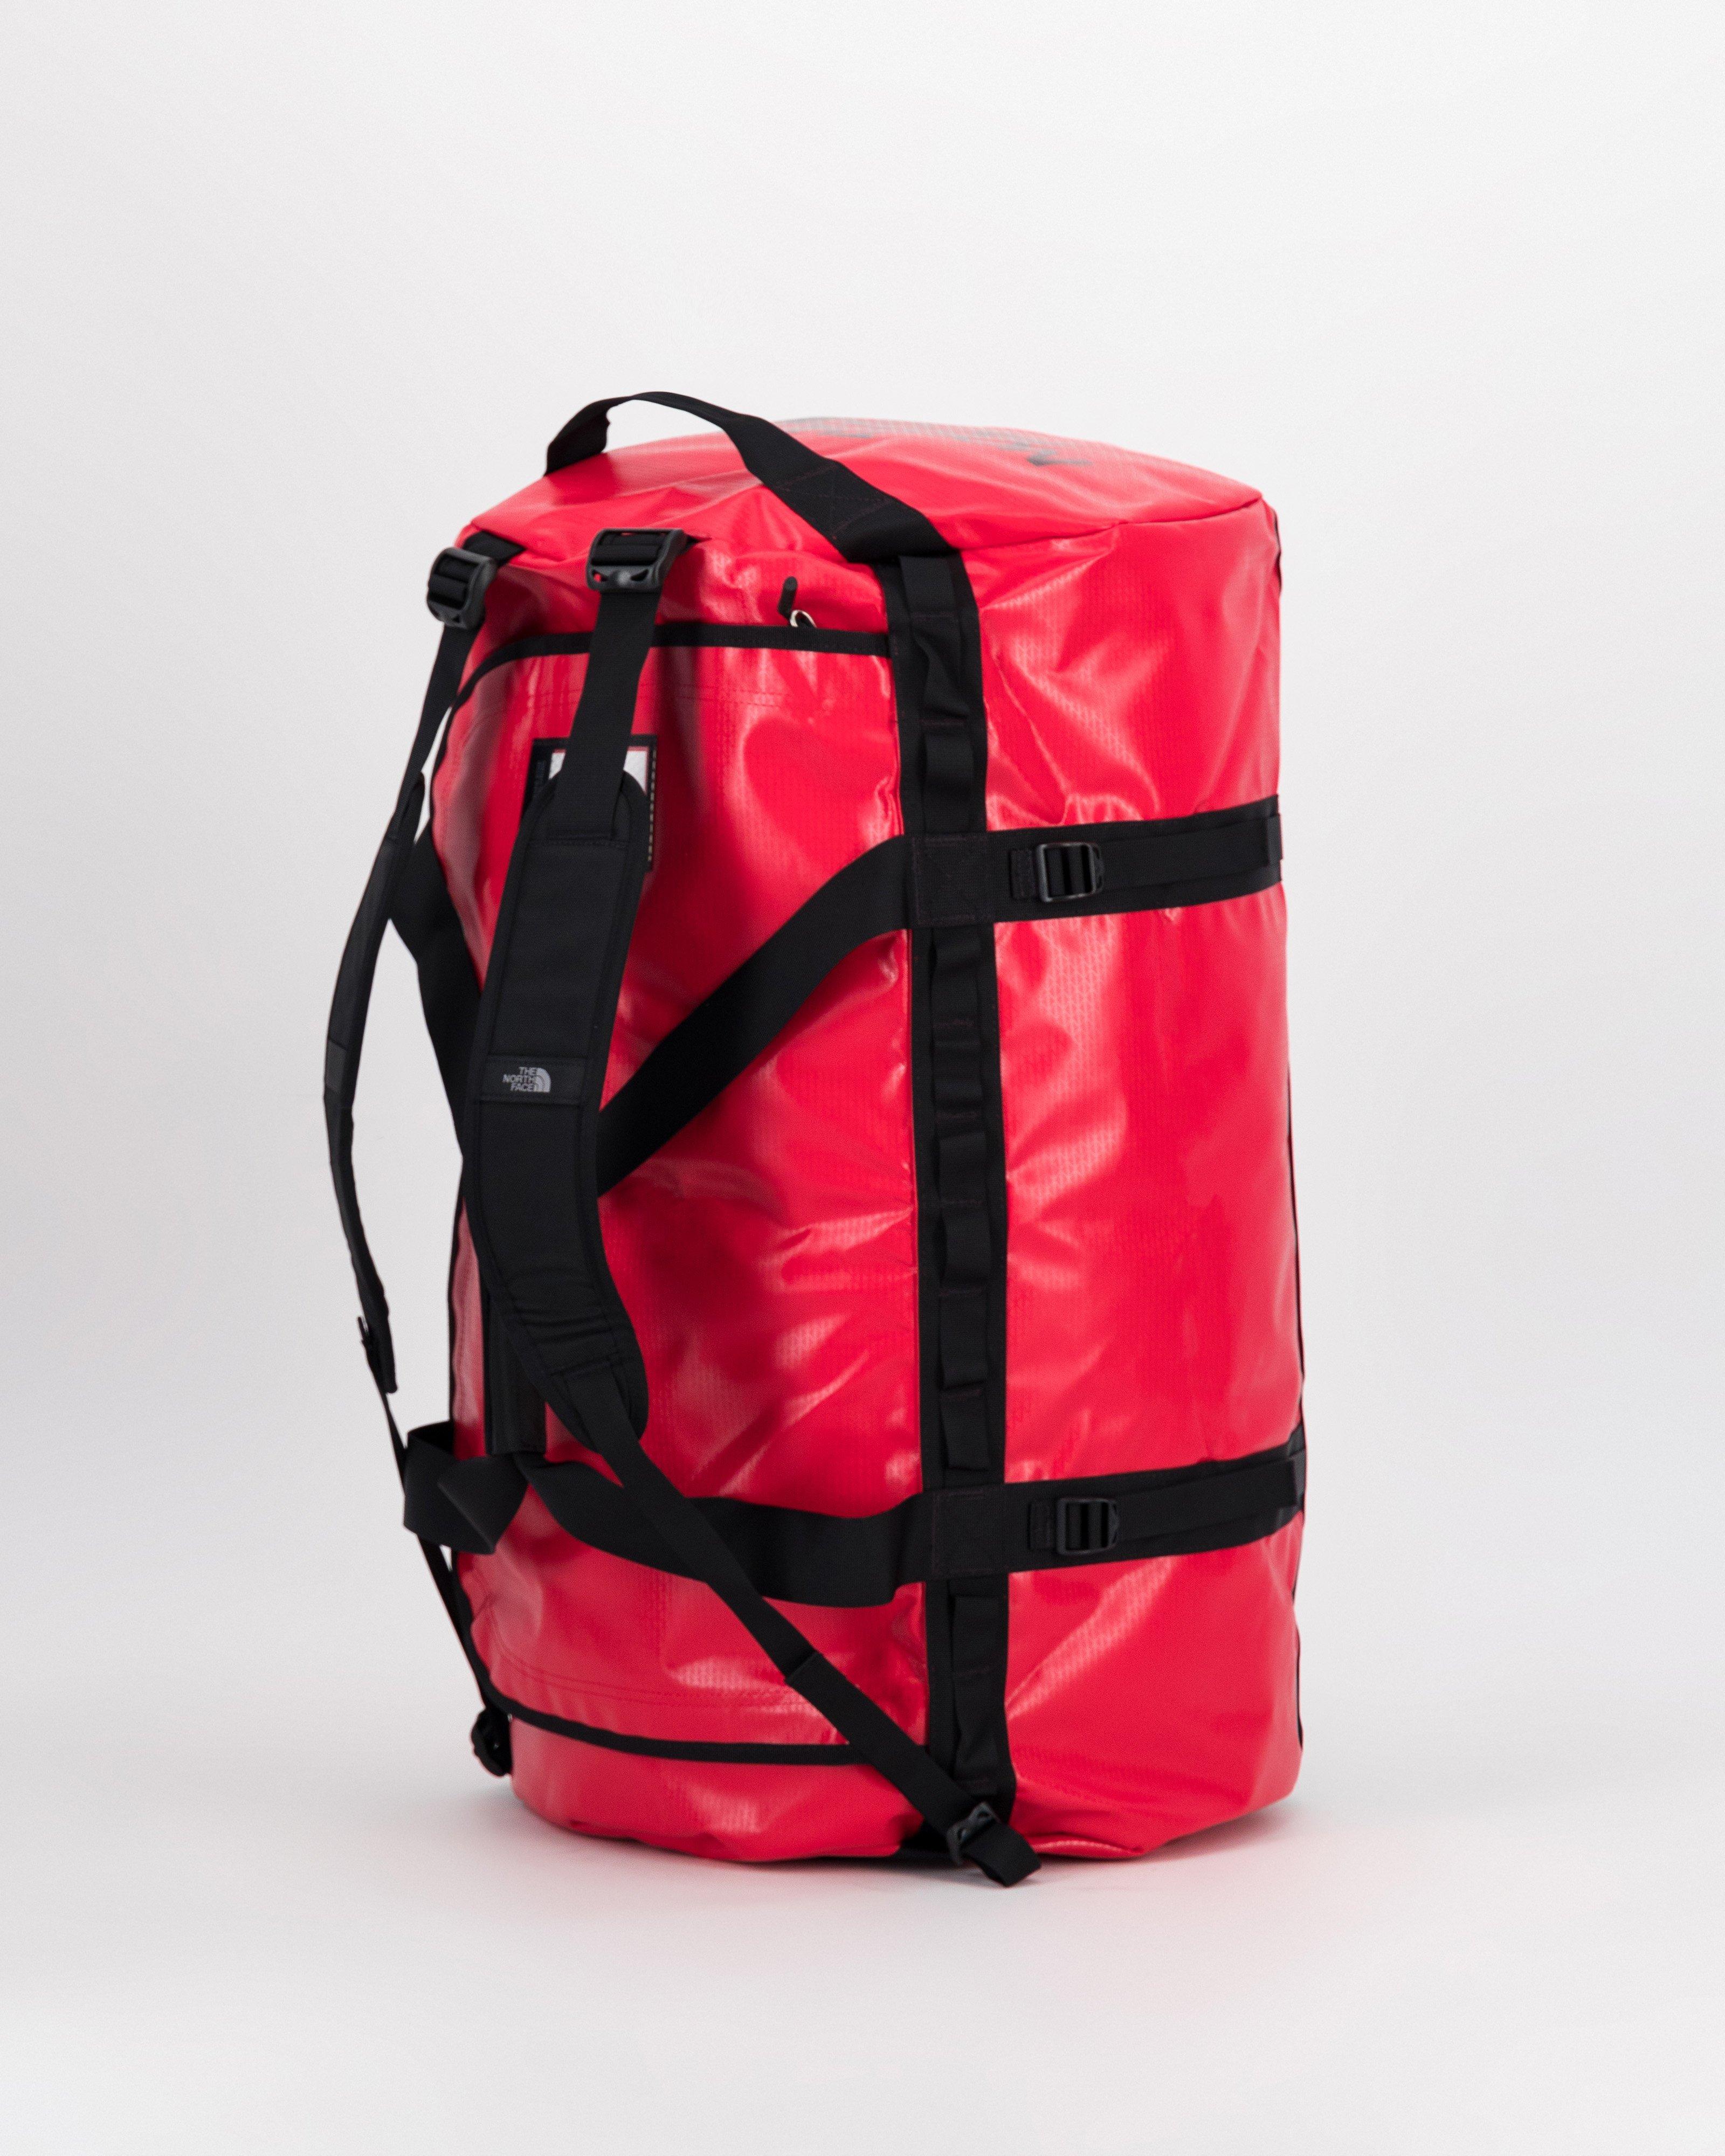 The North Face Extra-Large Base Camp Duffel Bag - 132L -  Red